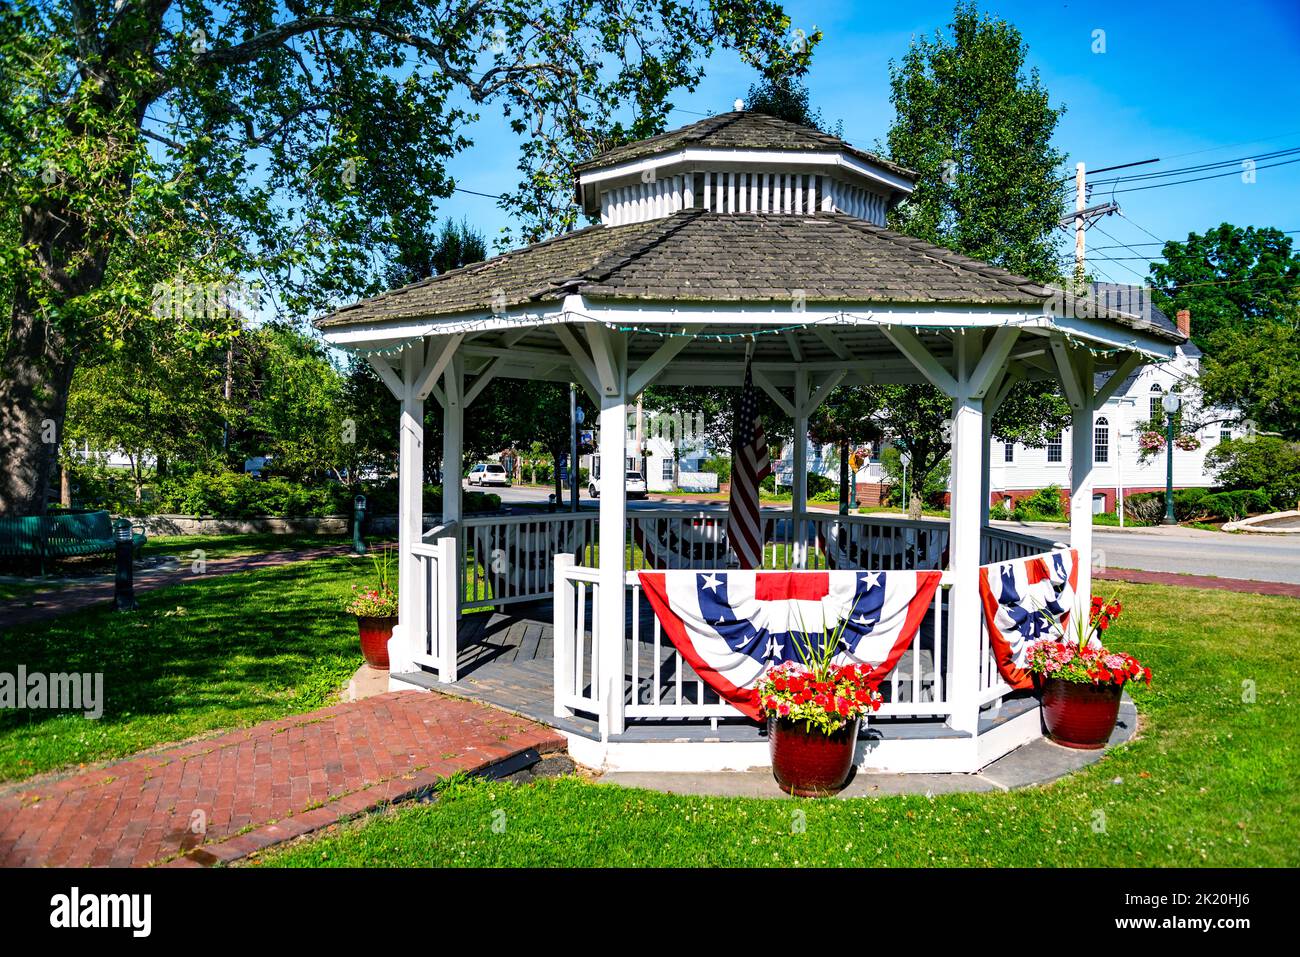 The old and historical town Gazebo in Amesbury, Massachusetts, USA Stock Photo